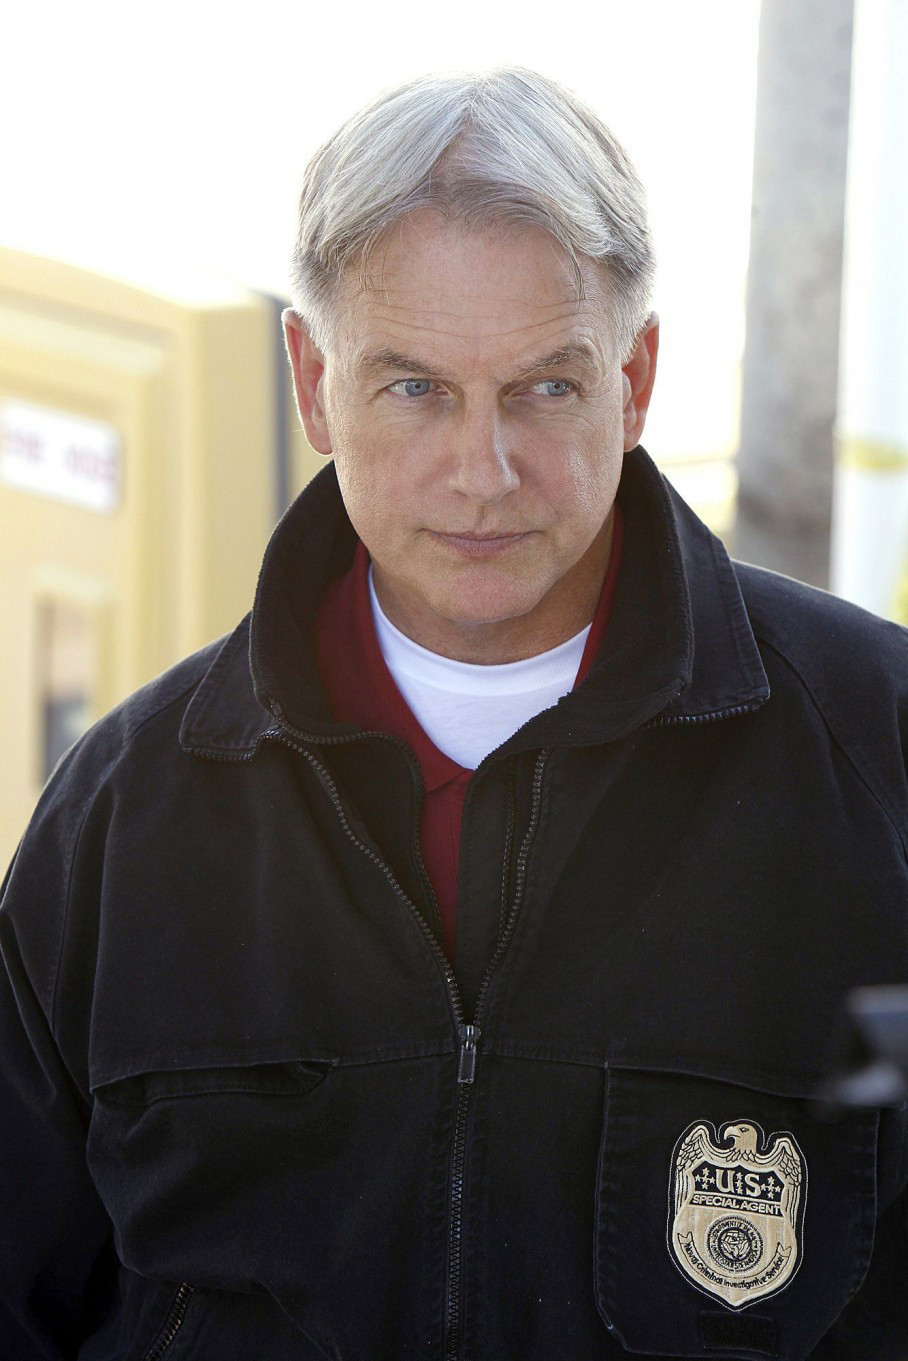 Mark Harmon spotted outside White House, says 'NCIS' will film there ... with Michelle Obama - Chicago Tribune